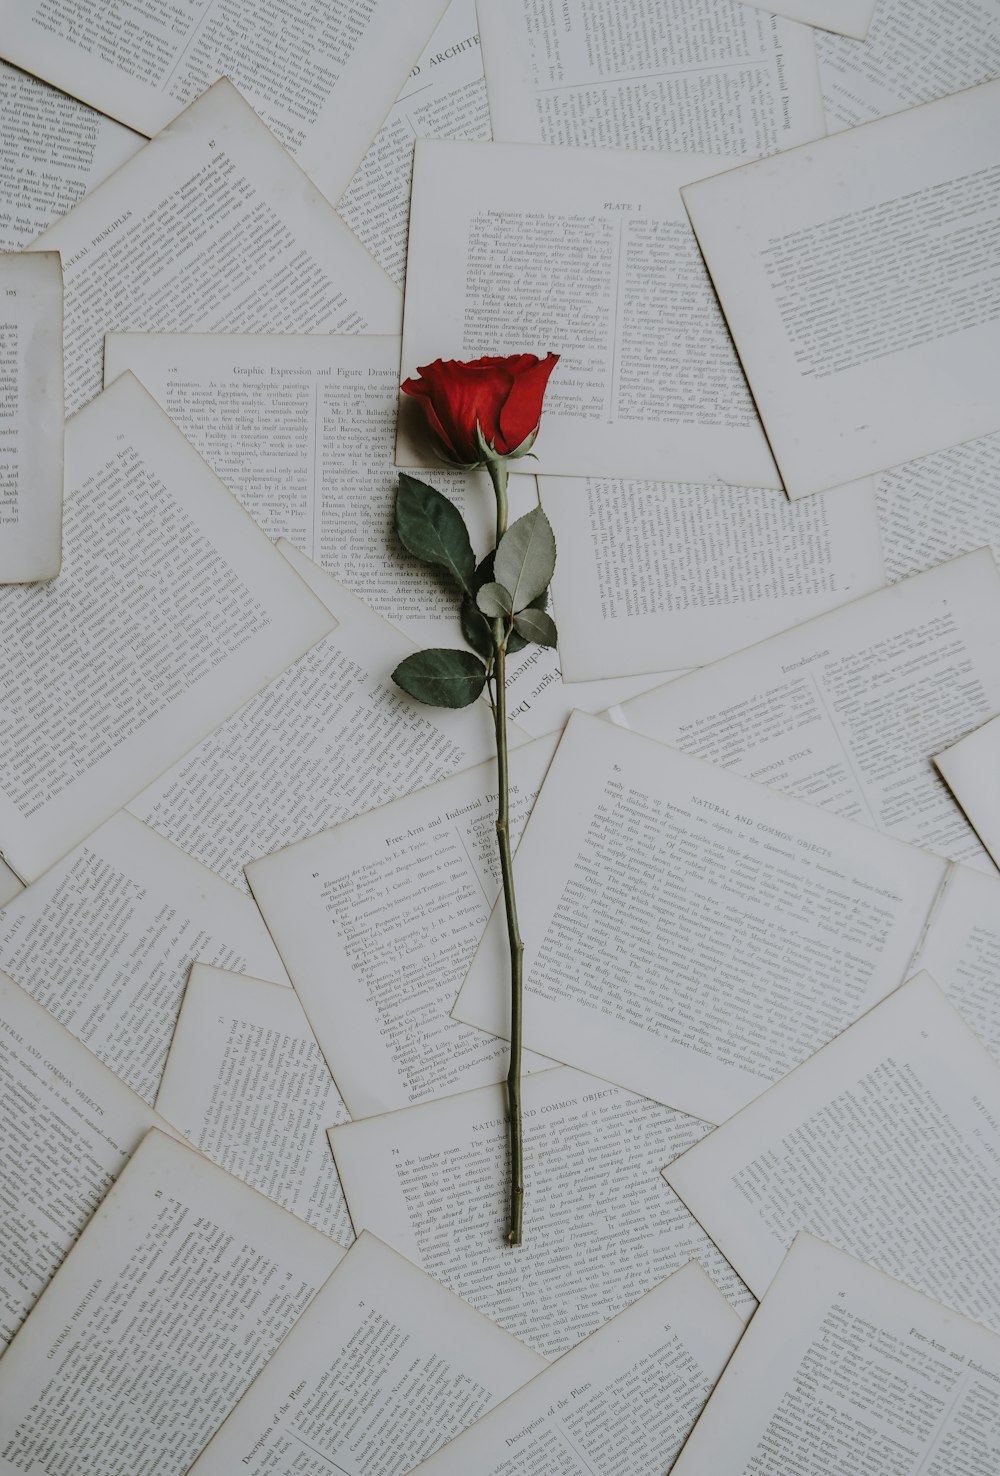 500+ Love Letters Pictures [HD] | Download Free Images on Unsplash